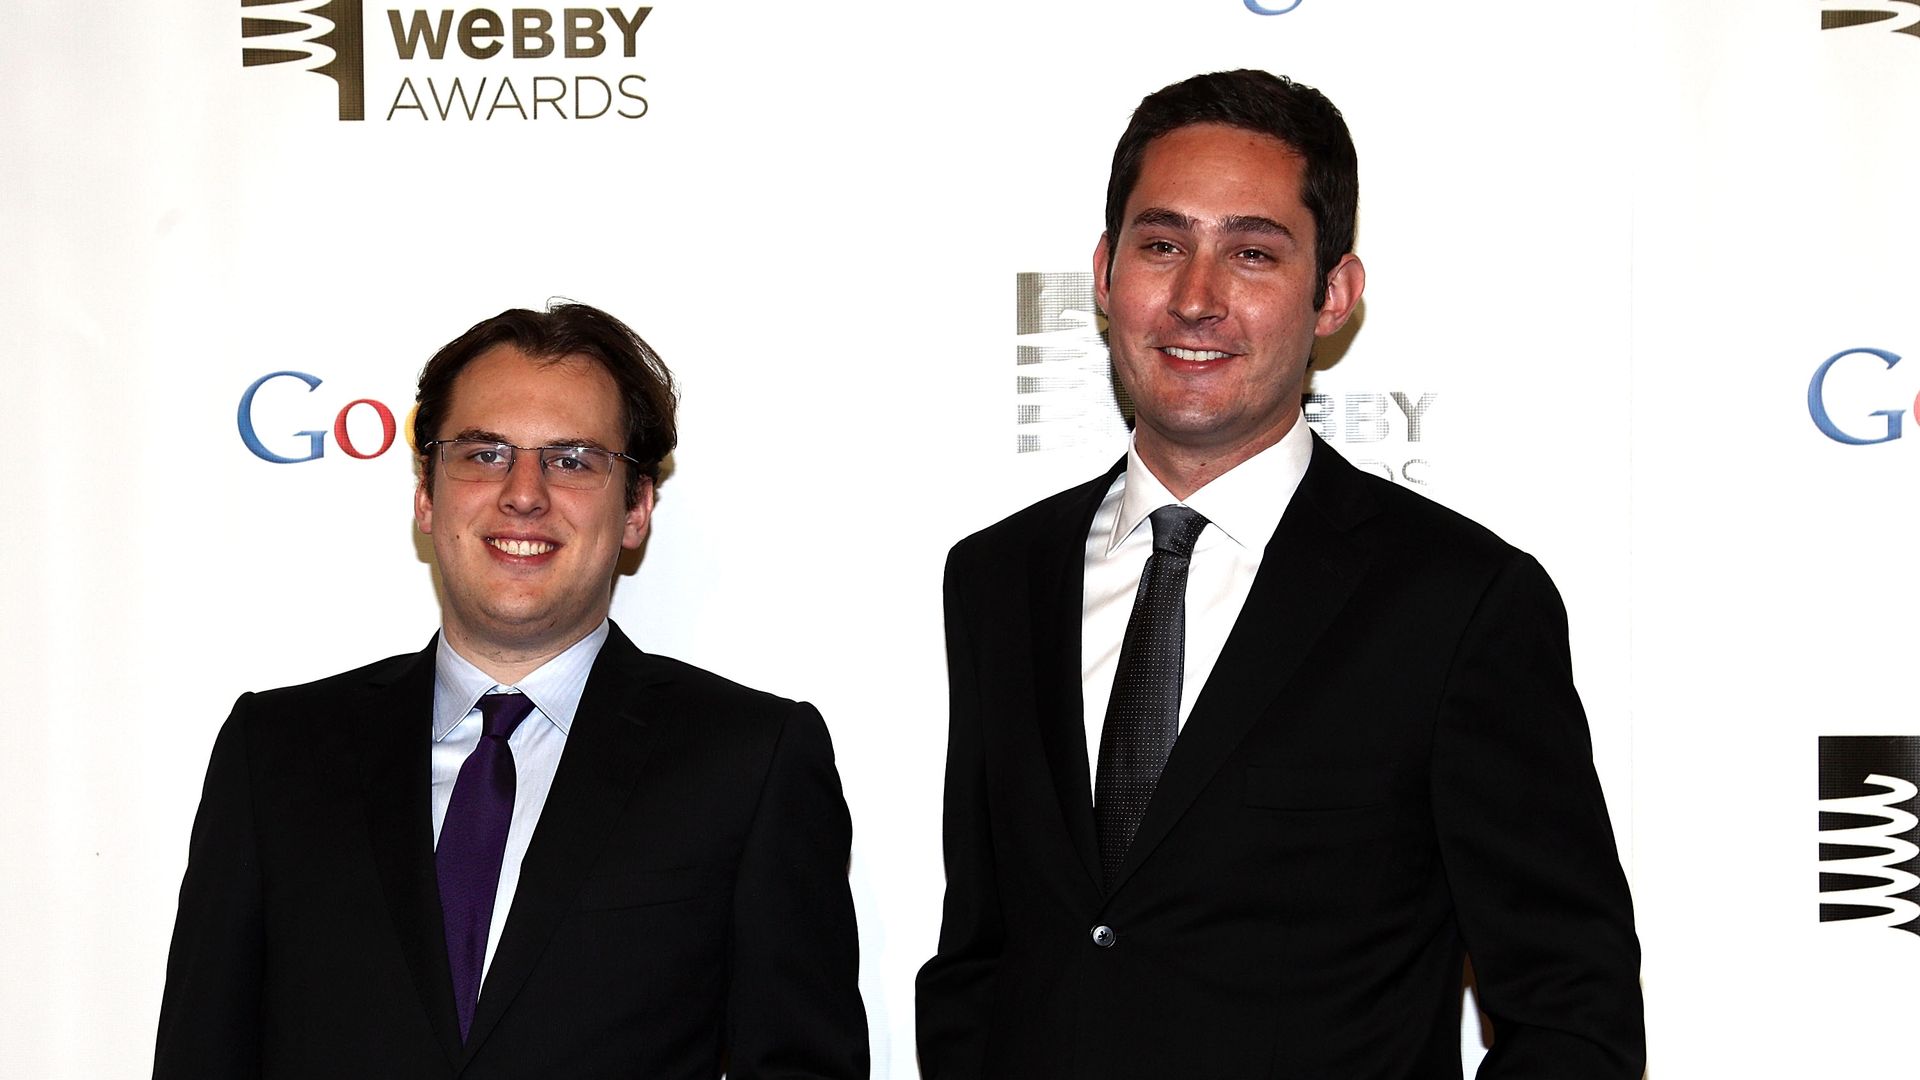  Instagram co-founders Kevin Systrom and Mike Krieger pose at for a photo at an event